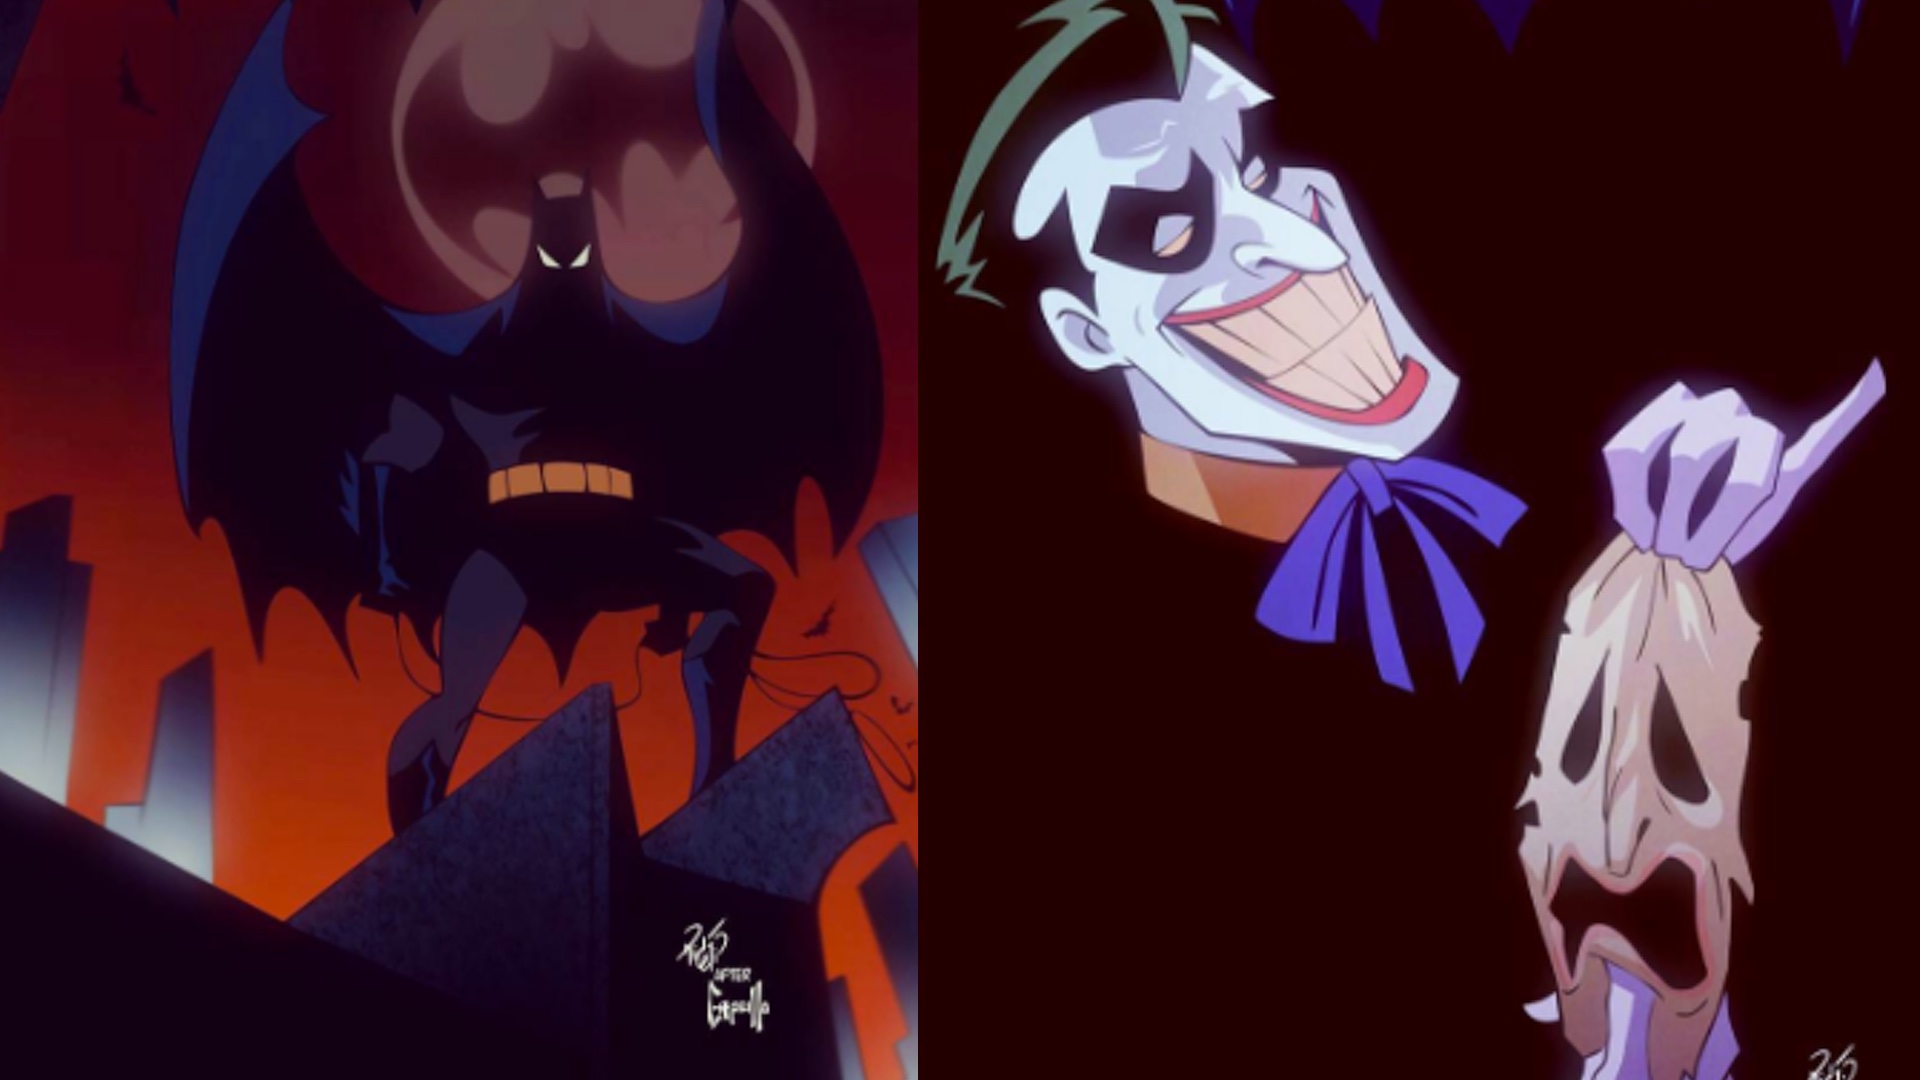 Batman Comic Covers Recreated in The Style of BATMAN: THE ANIMATED SERIES —  GeekTyrant